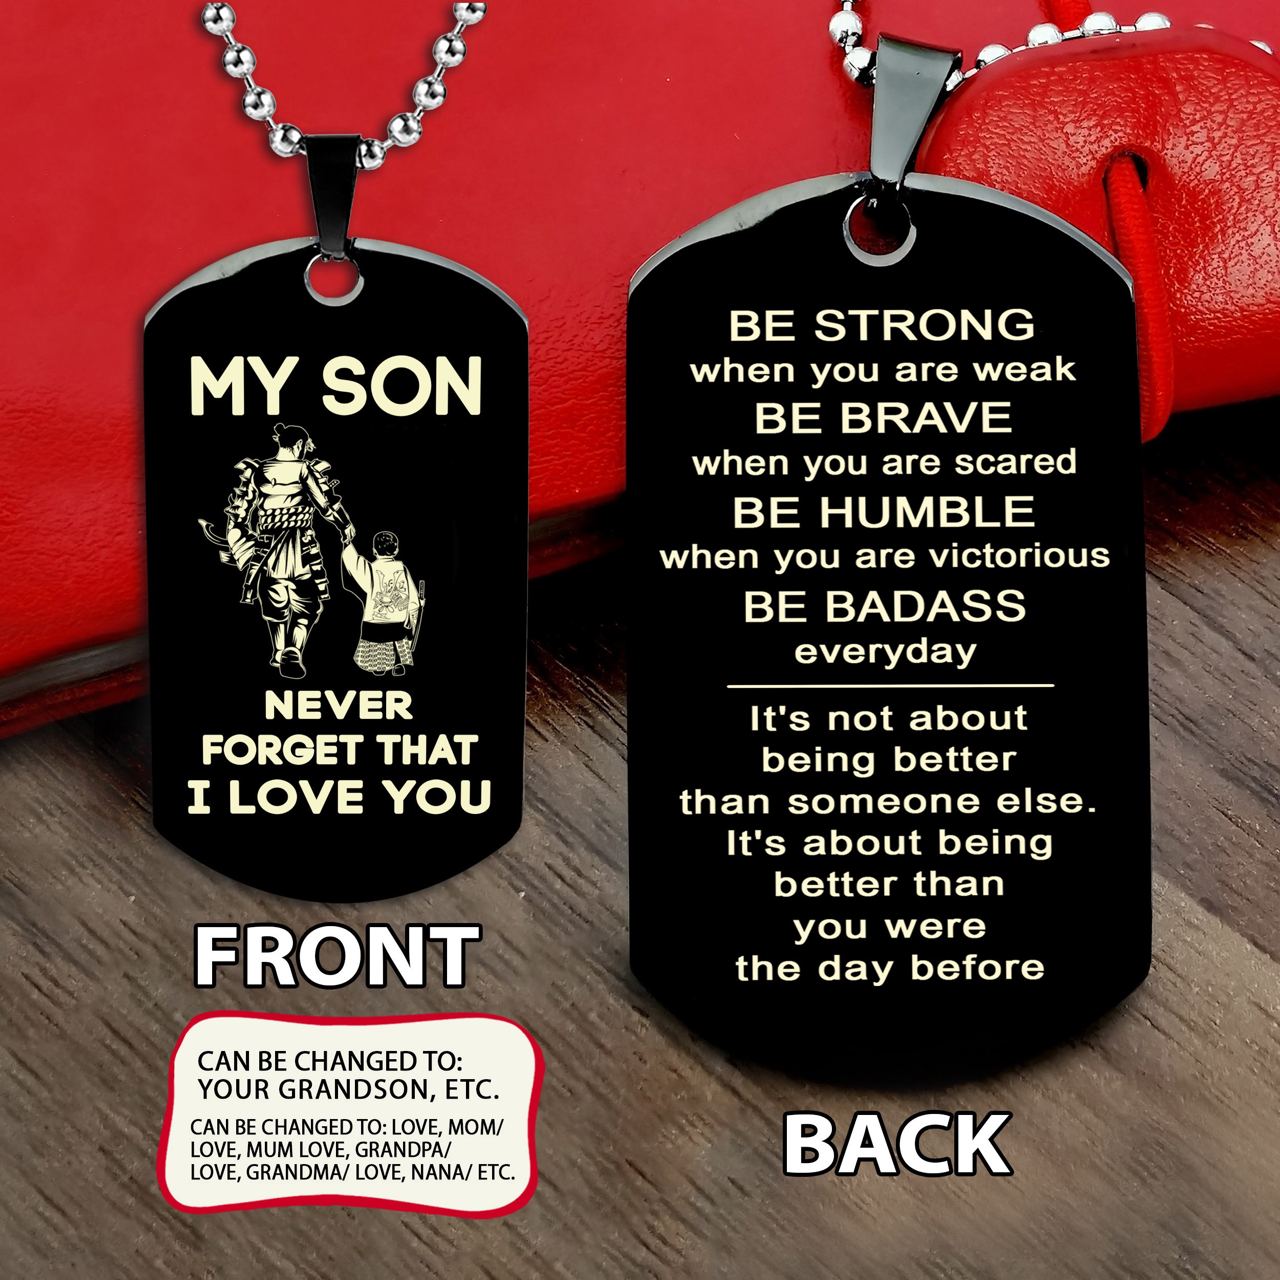 Samurai engraved dog tag dad mom to son, Be strong be brave be humble, It is not about better than someone else, It is about being better than you were the day before